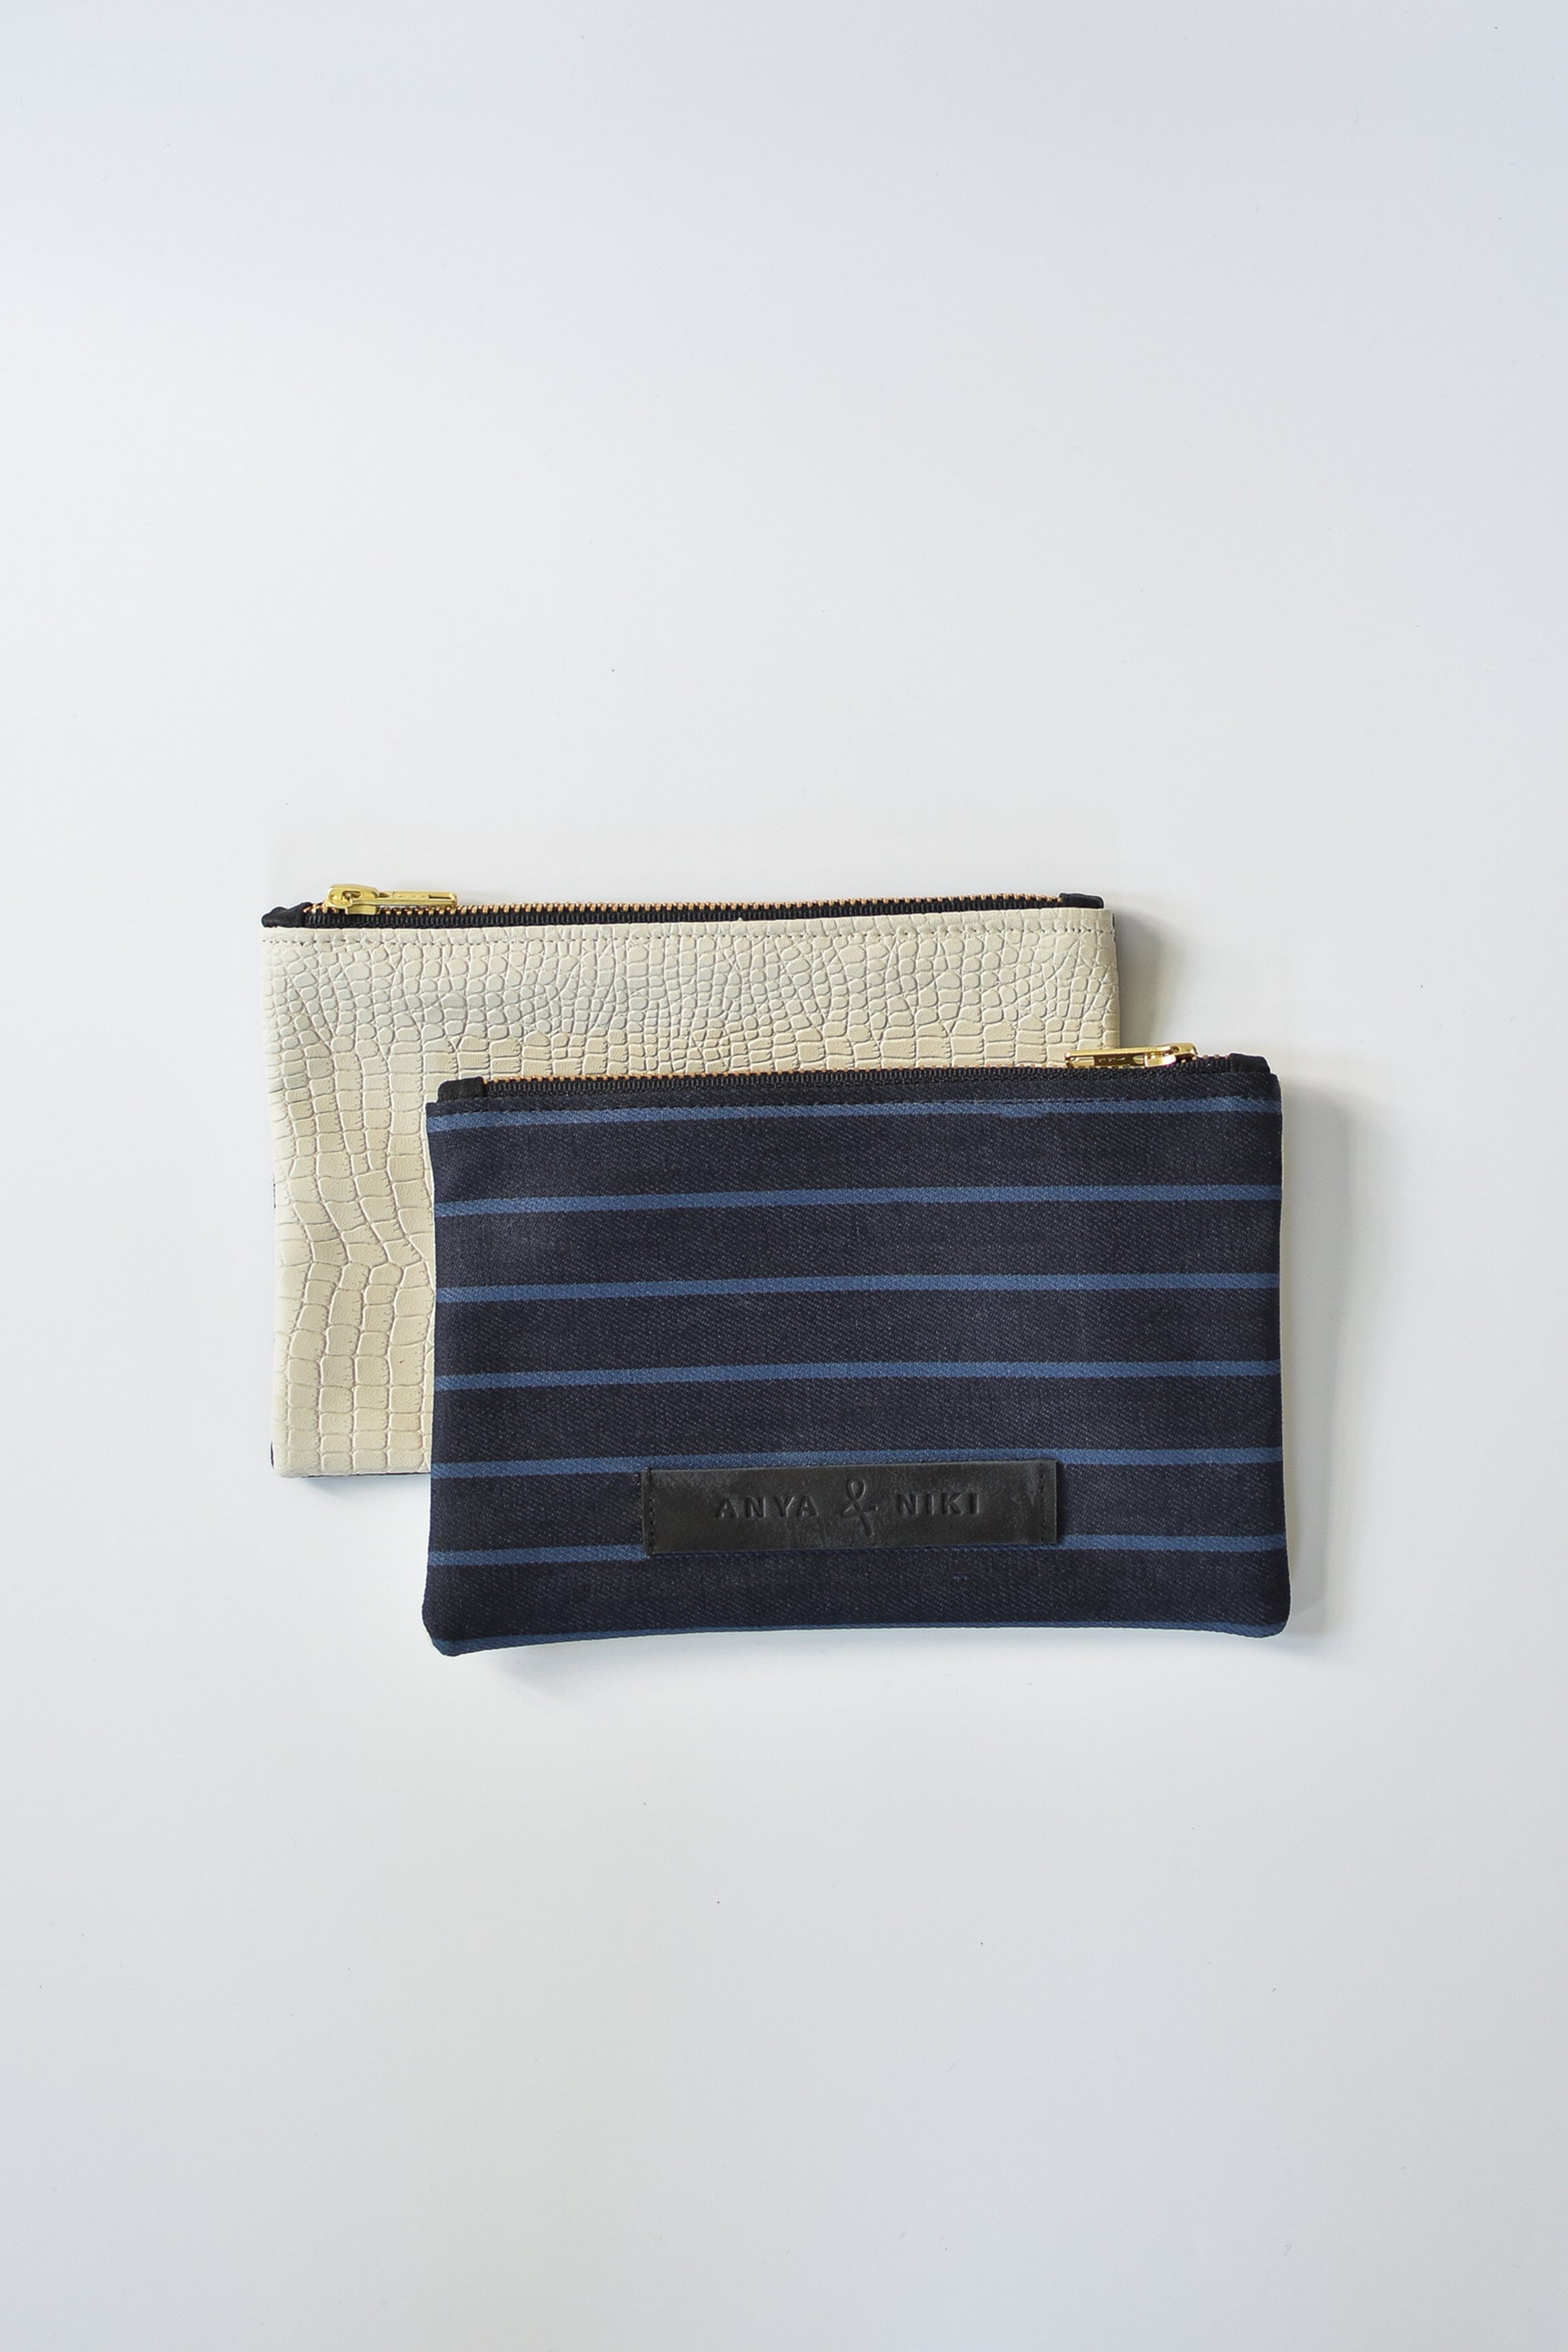 Striped dark denim and off-white croc embossed leather small pouch with brass zipper and leather logo label.